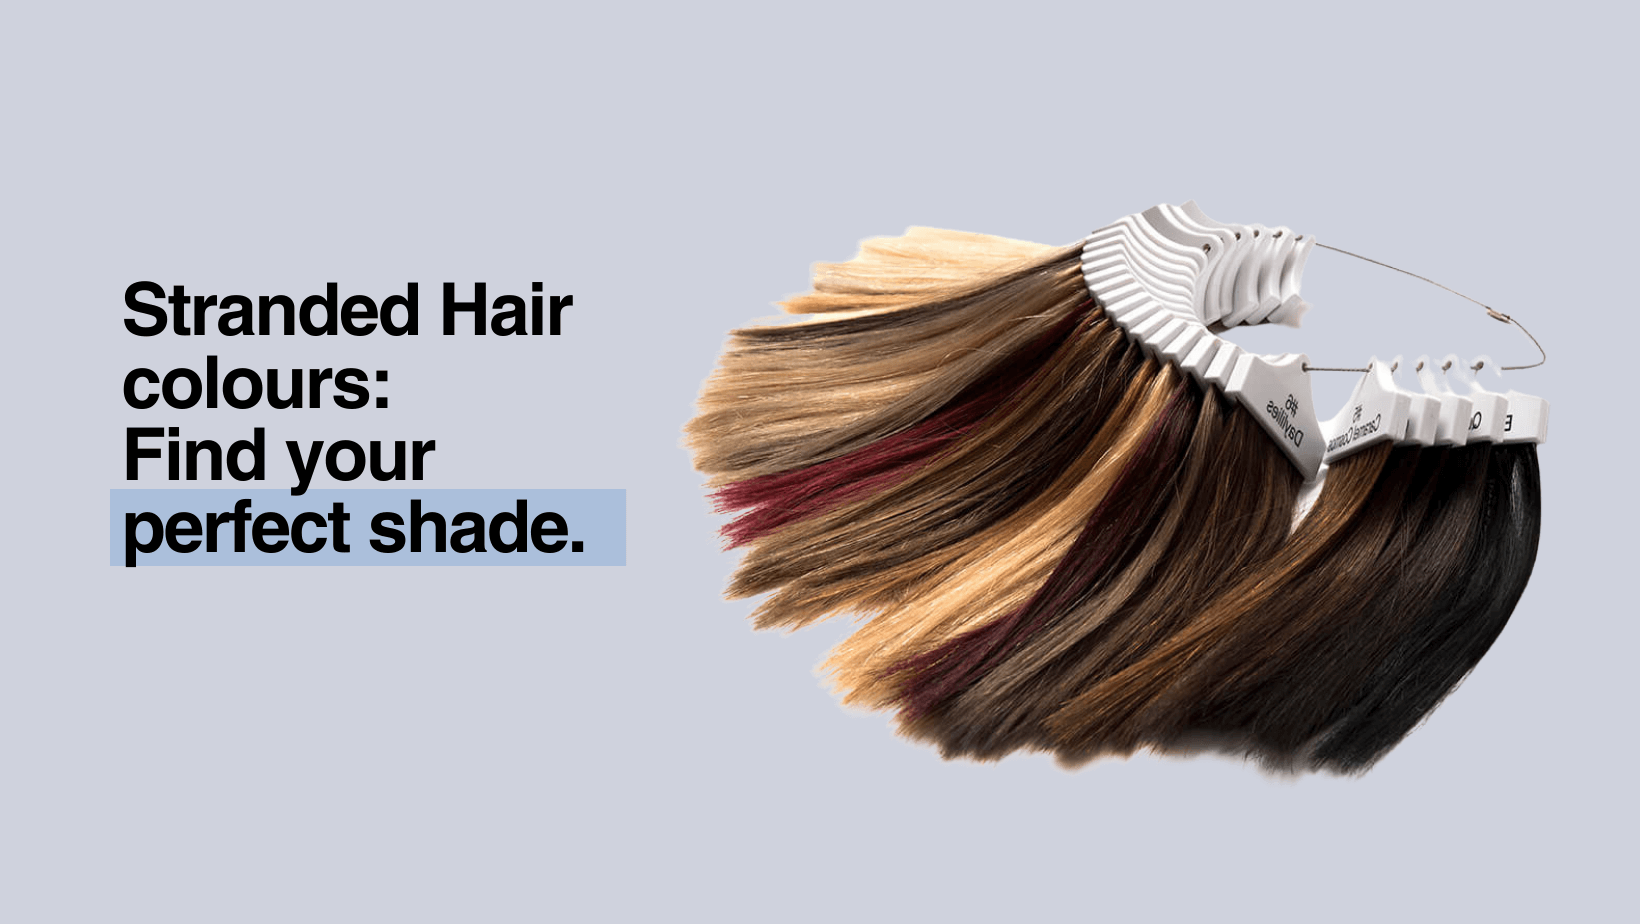 Stranded Hair Colours: Find Your Perfect Shade